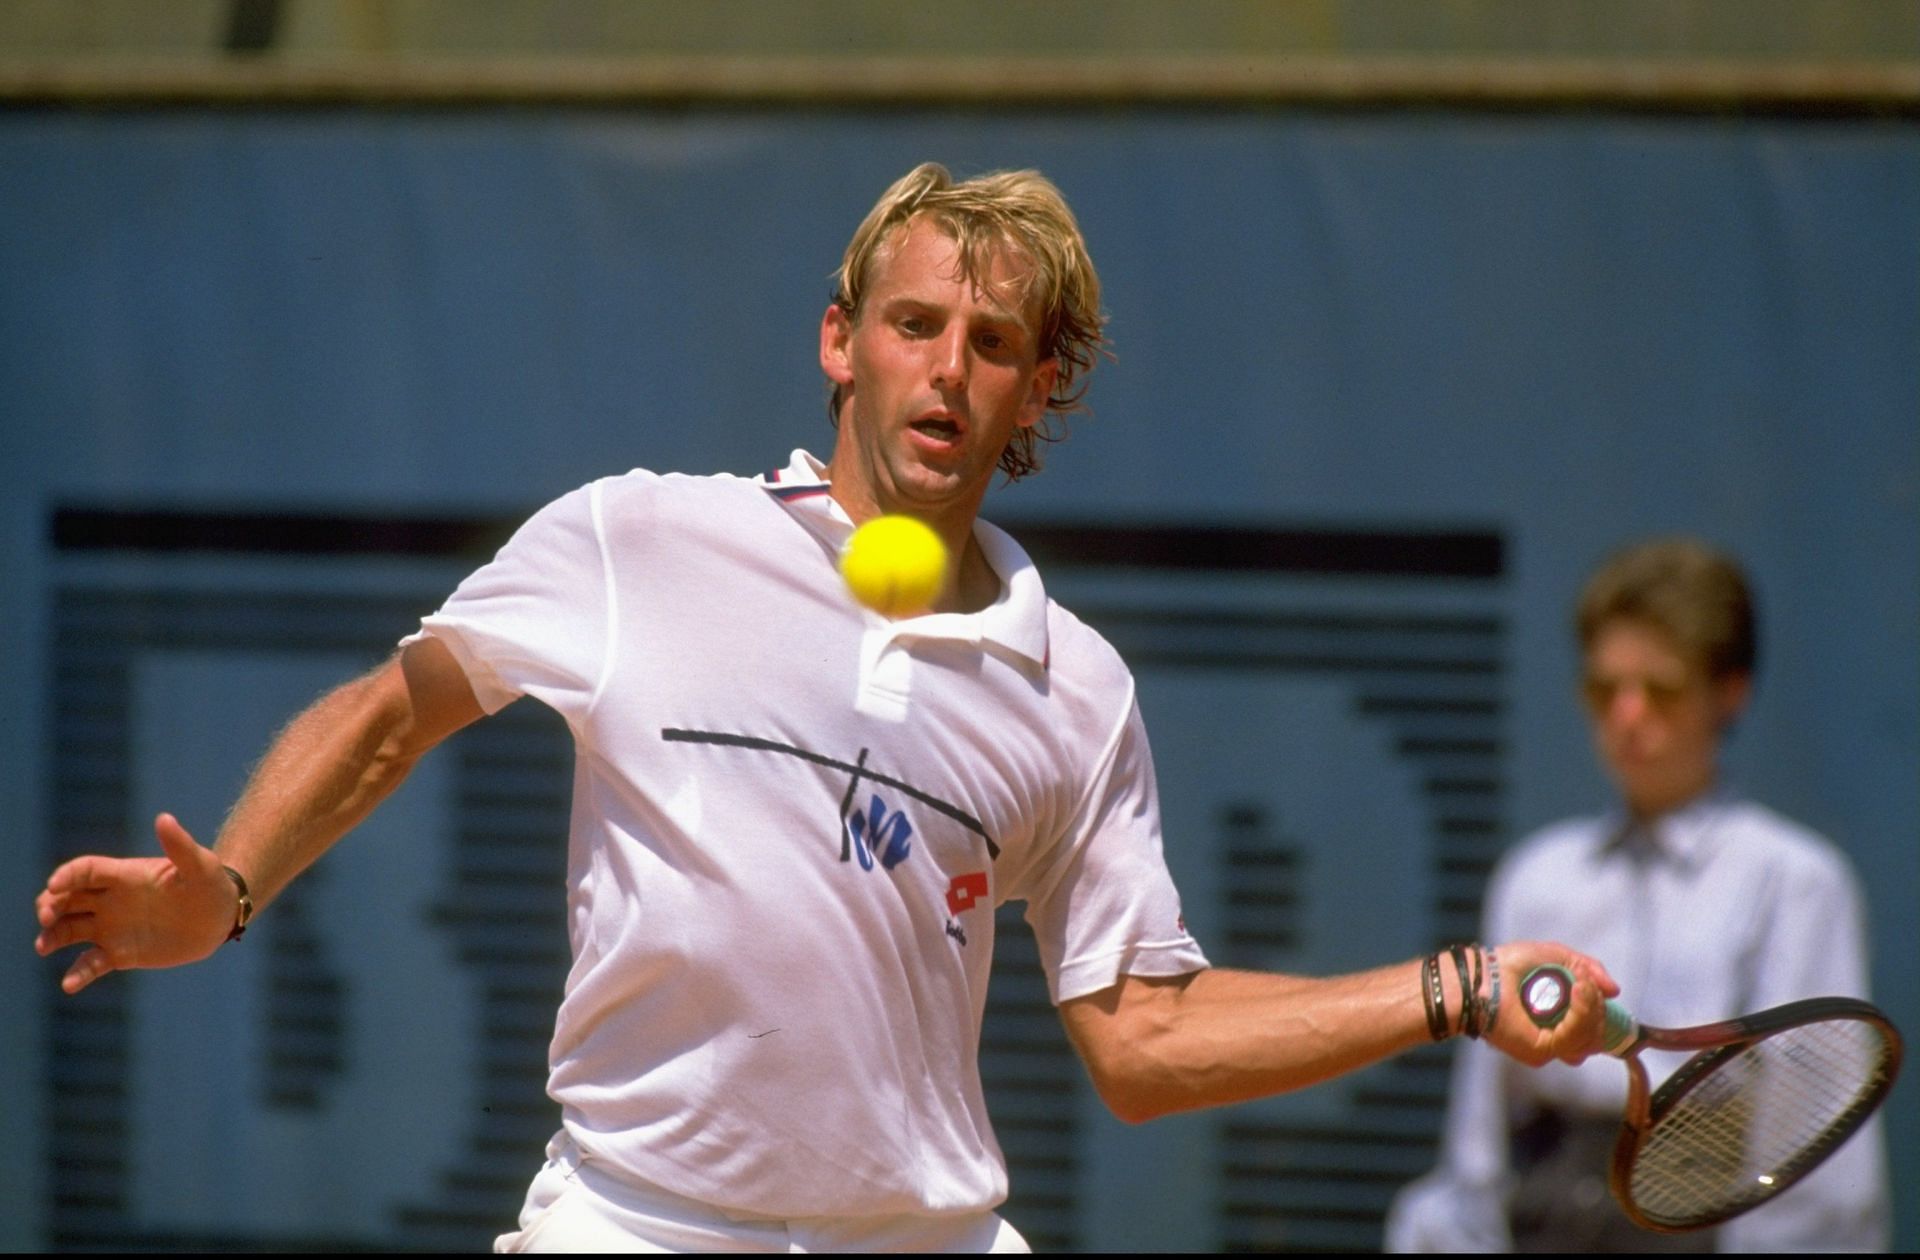 Thomas Muster won 35 of the 51 clay tournaments he reached the semifinals of since 1990